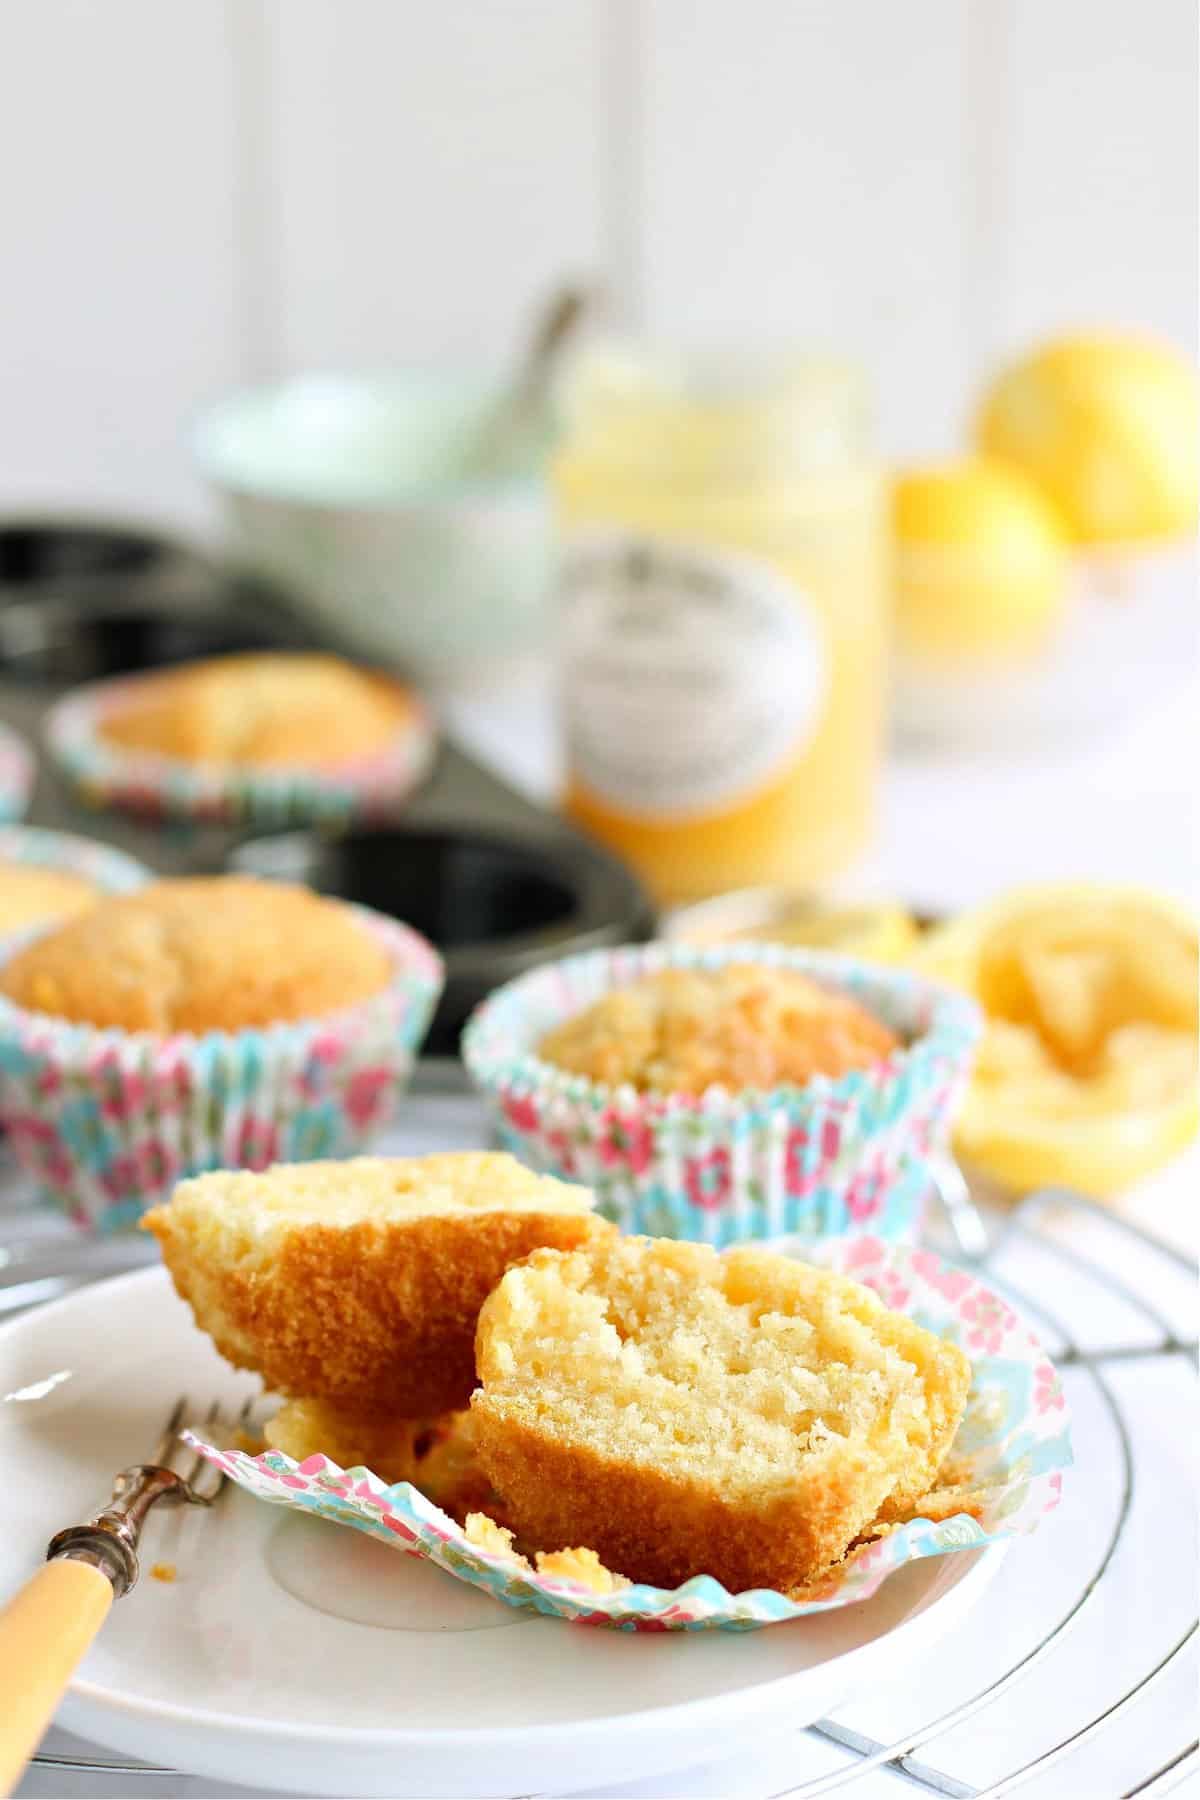 A lemon drizzle muffin cut in half on a plate.